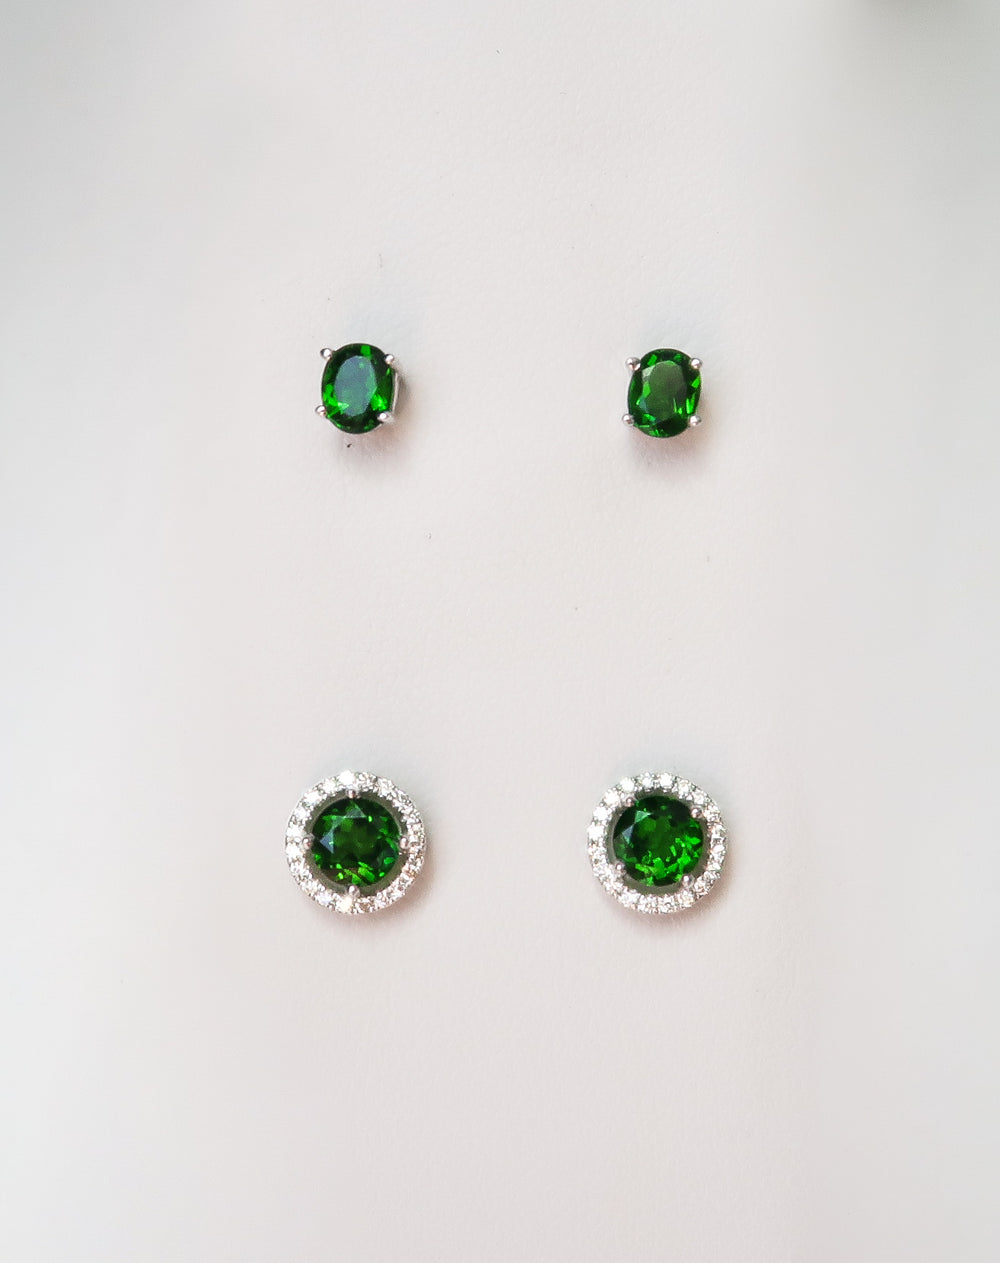 oval emerald stud earrings and round emerald with a diamond halo earring studs